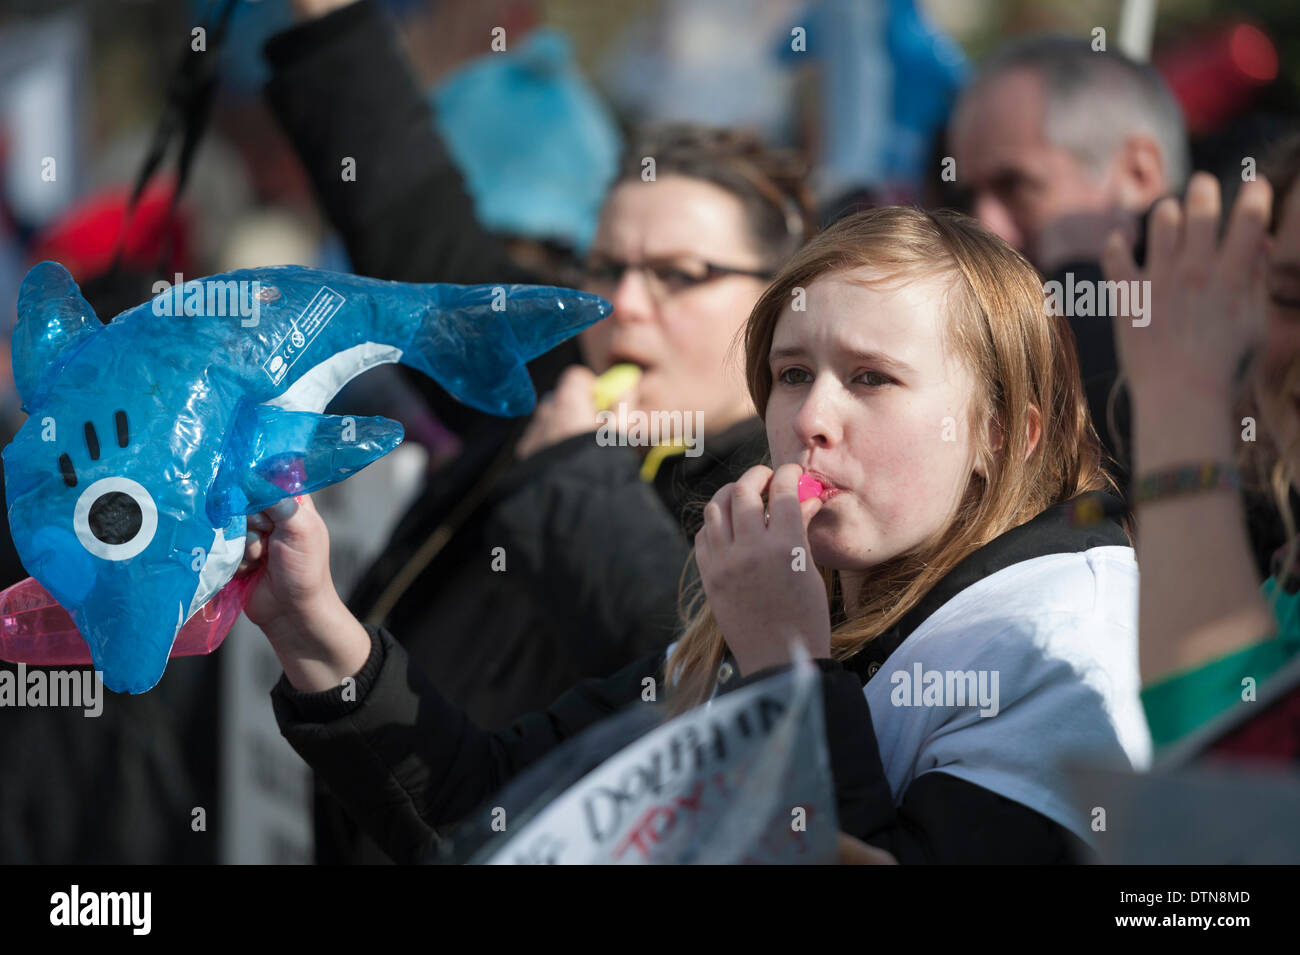 Piccadilly, London, UK. 21st Feb 2014.  Protesters stage a demonstration outside the Embassy of Japan in London, against the slaughter and capture of dolphins and small whales in Japan. The dolphin drive hunt in Taiji, takes place every year from September to April. Credit:  Lee Thomas/Alamy Live News Stock Photo